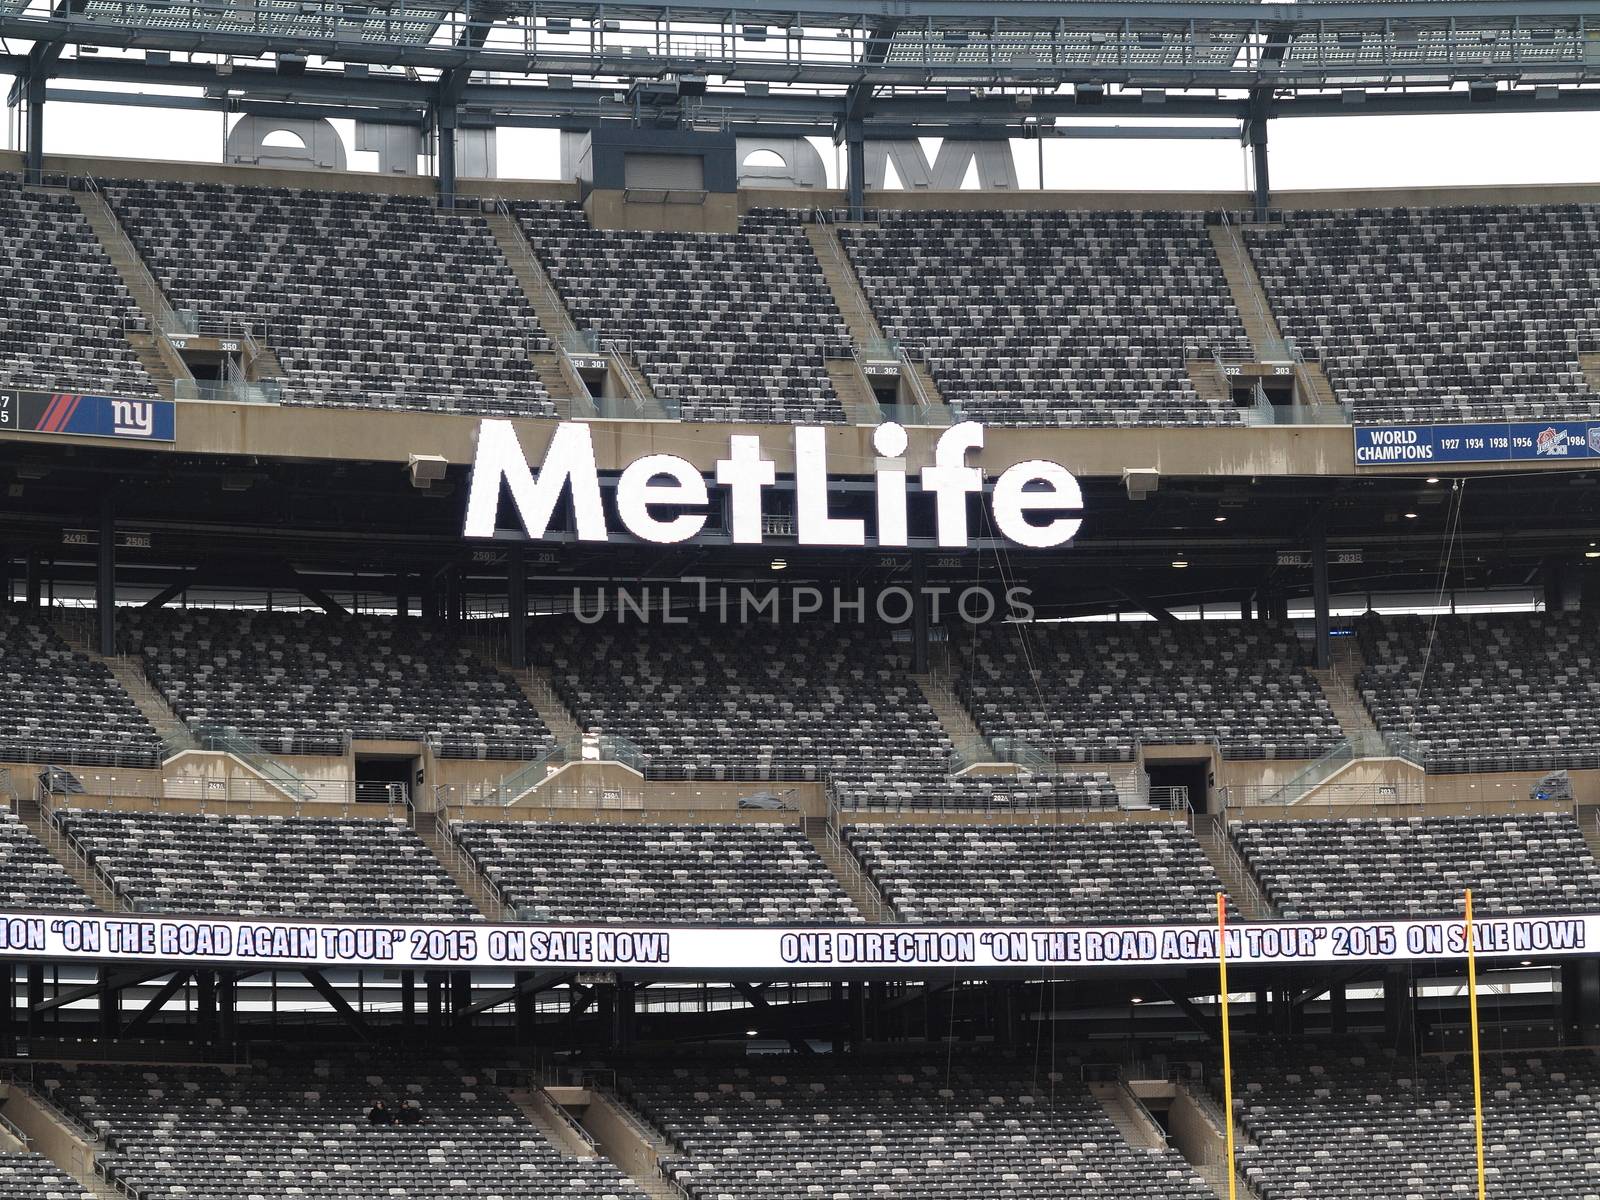 Upper decks for the football Jets and Giants at MetLife Stadium in New Jersey.